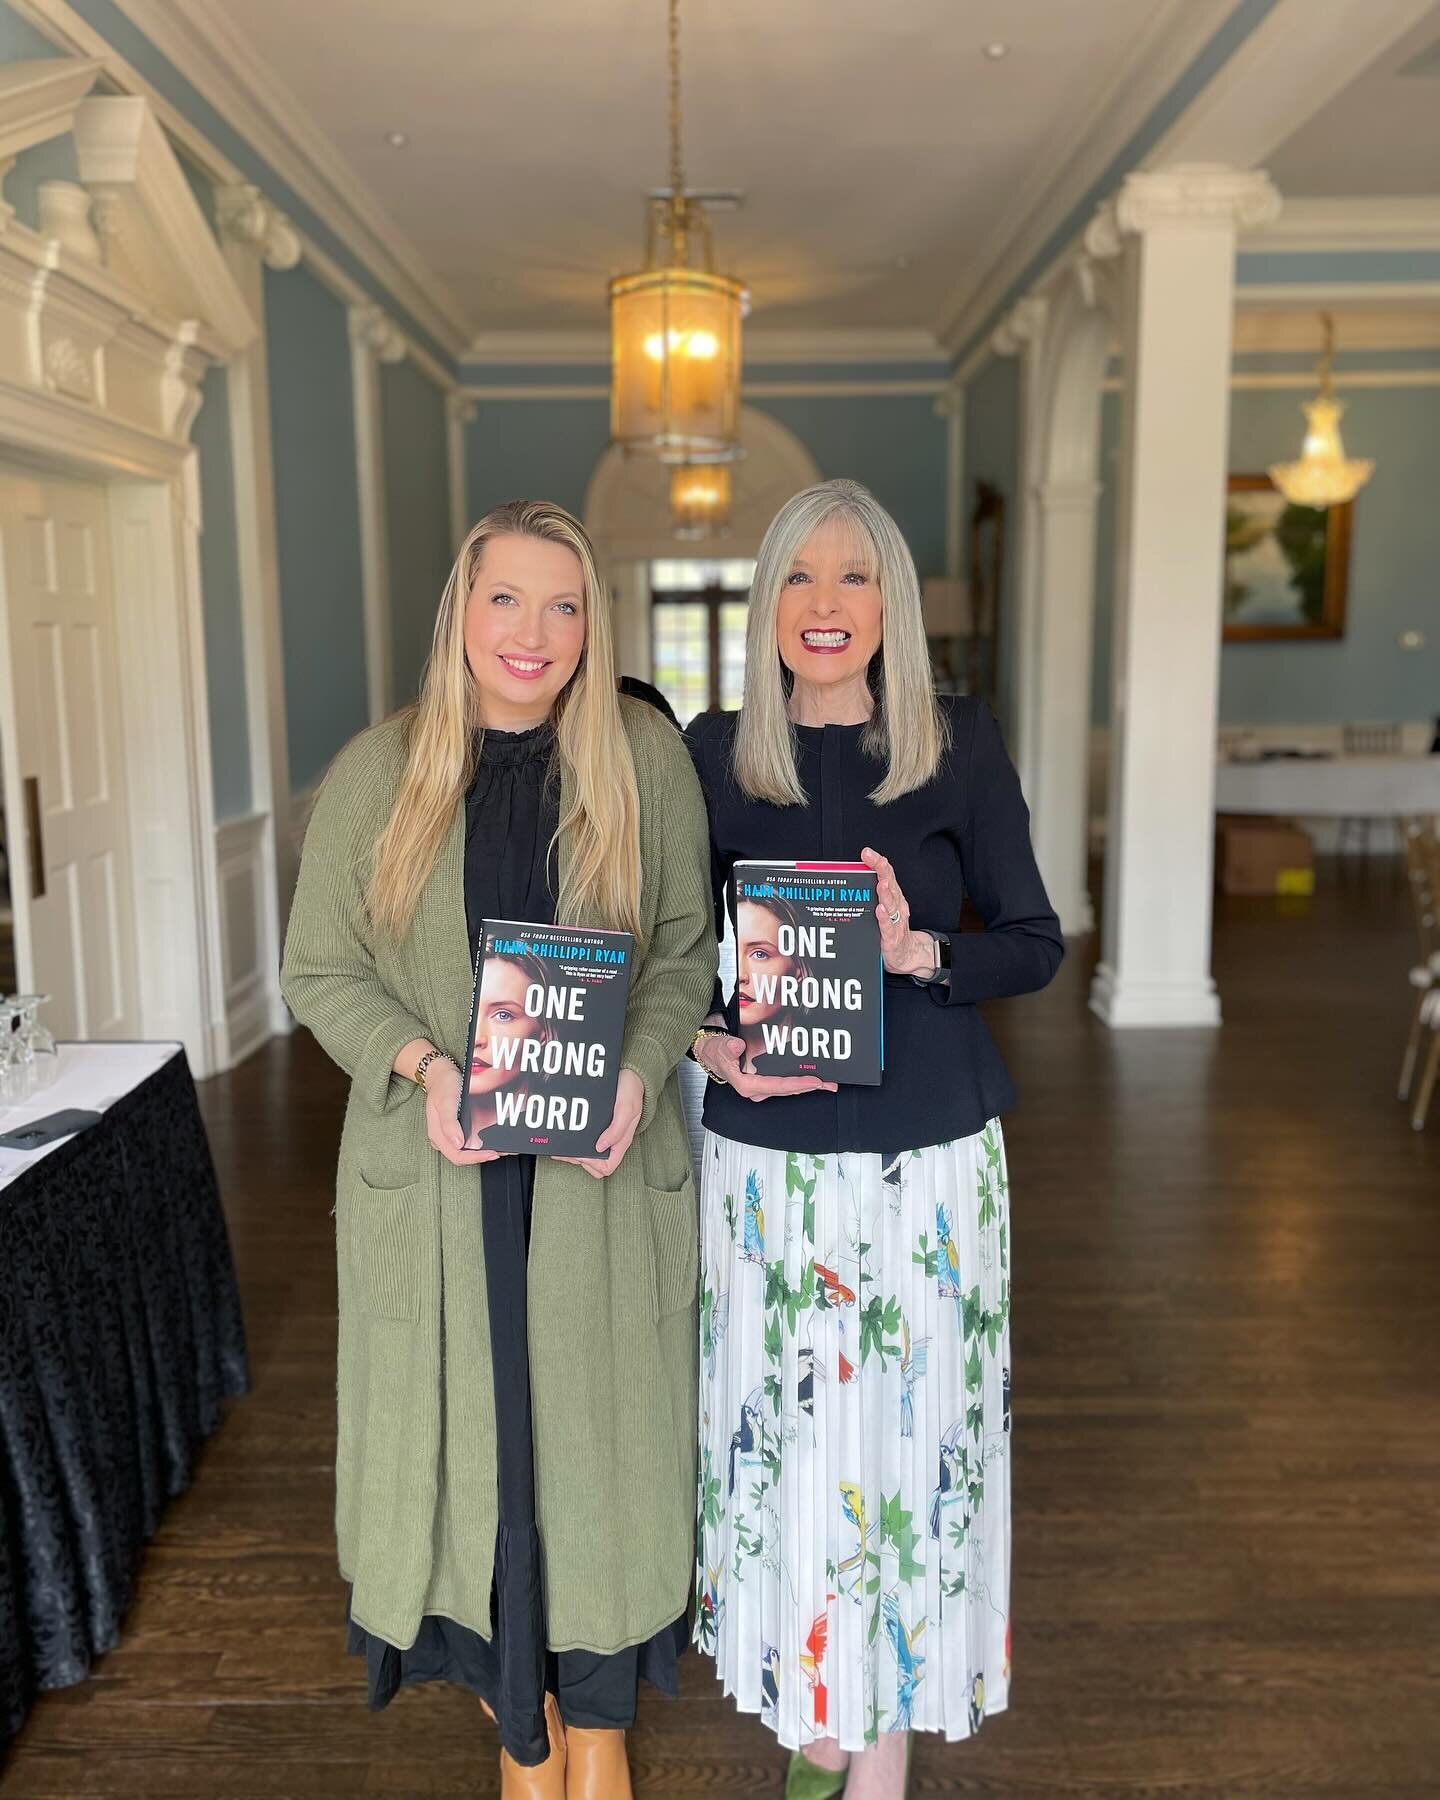 A fantastic day today with Bestselling Author Hank Phillippi Ryan at our Litchfield Books Exclusive Author Event&copy;! 🎉
HANK PHILLIPPI RYAN is the USA Today bestselling author of 15 novels of suspense. She has also won multiple prestigious awards 